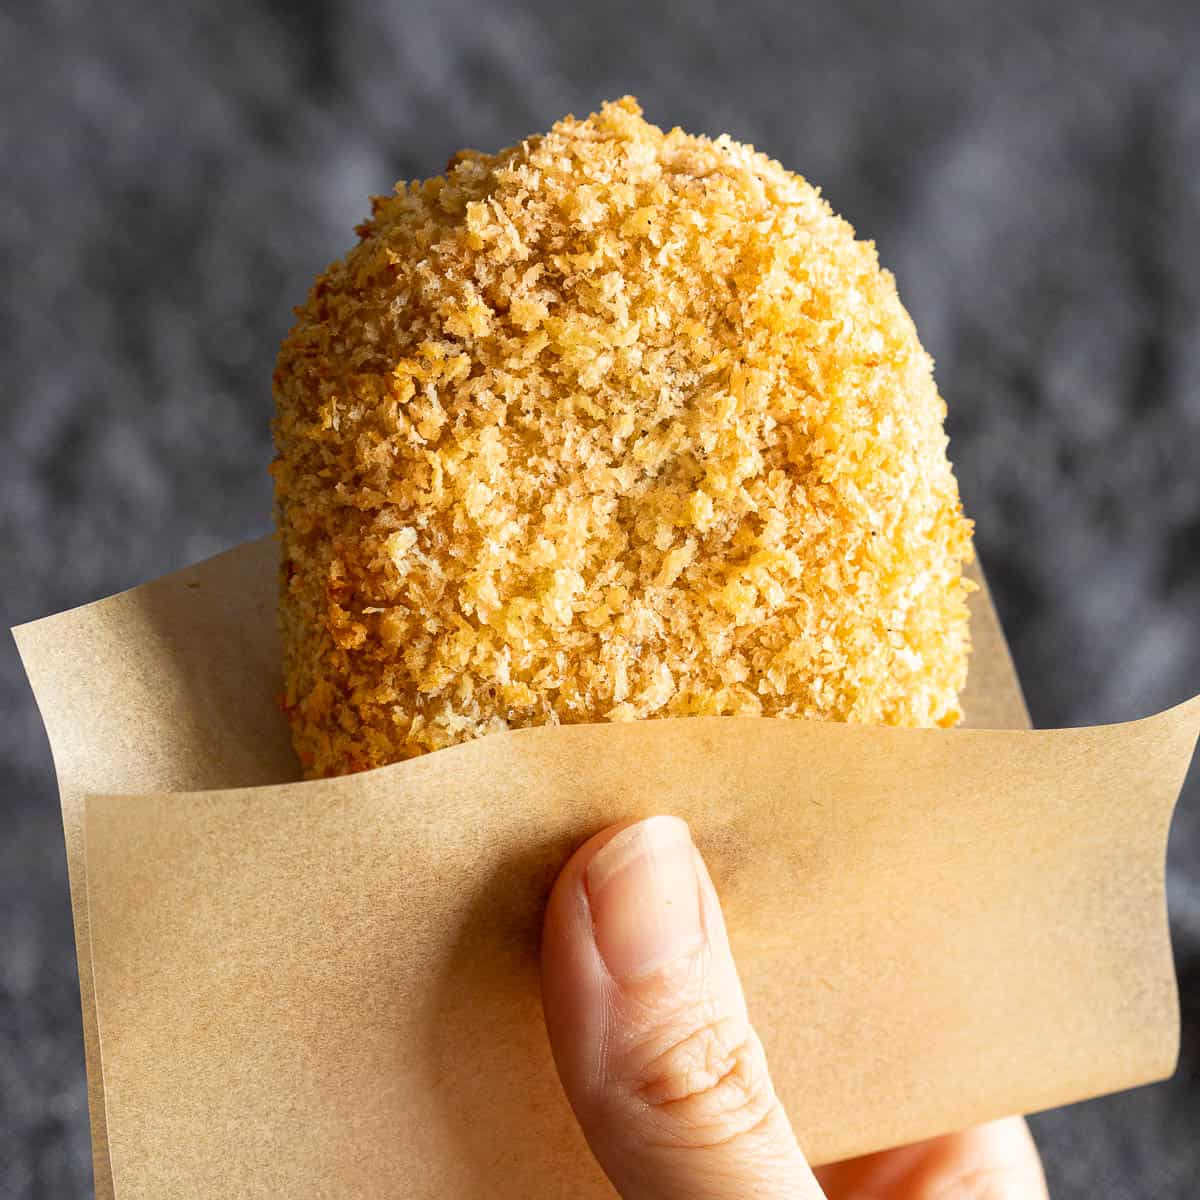 A korokke is held in baking paper with a hand.